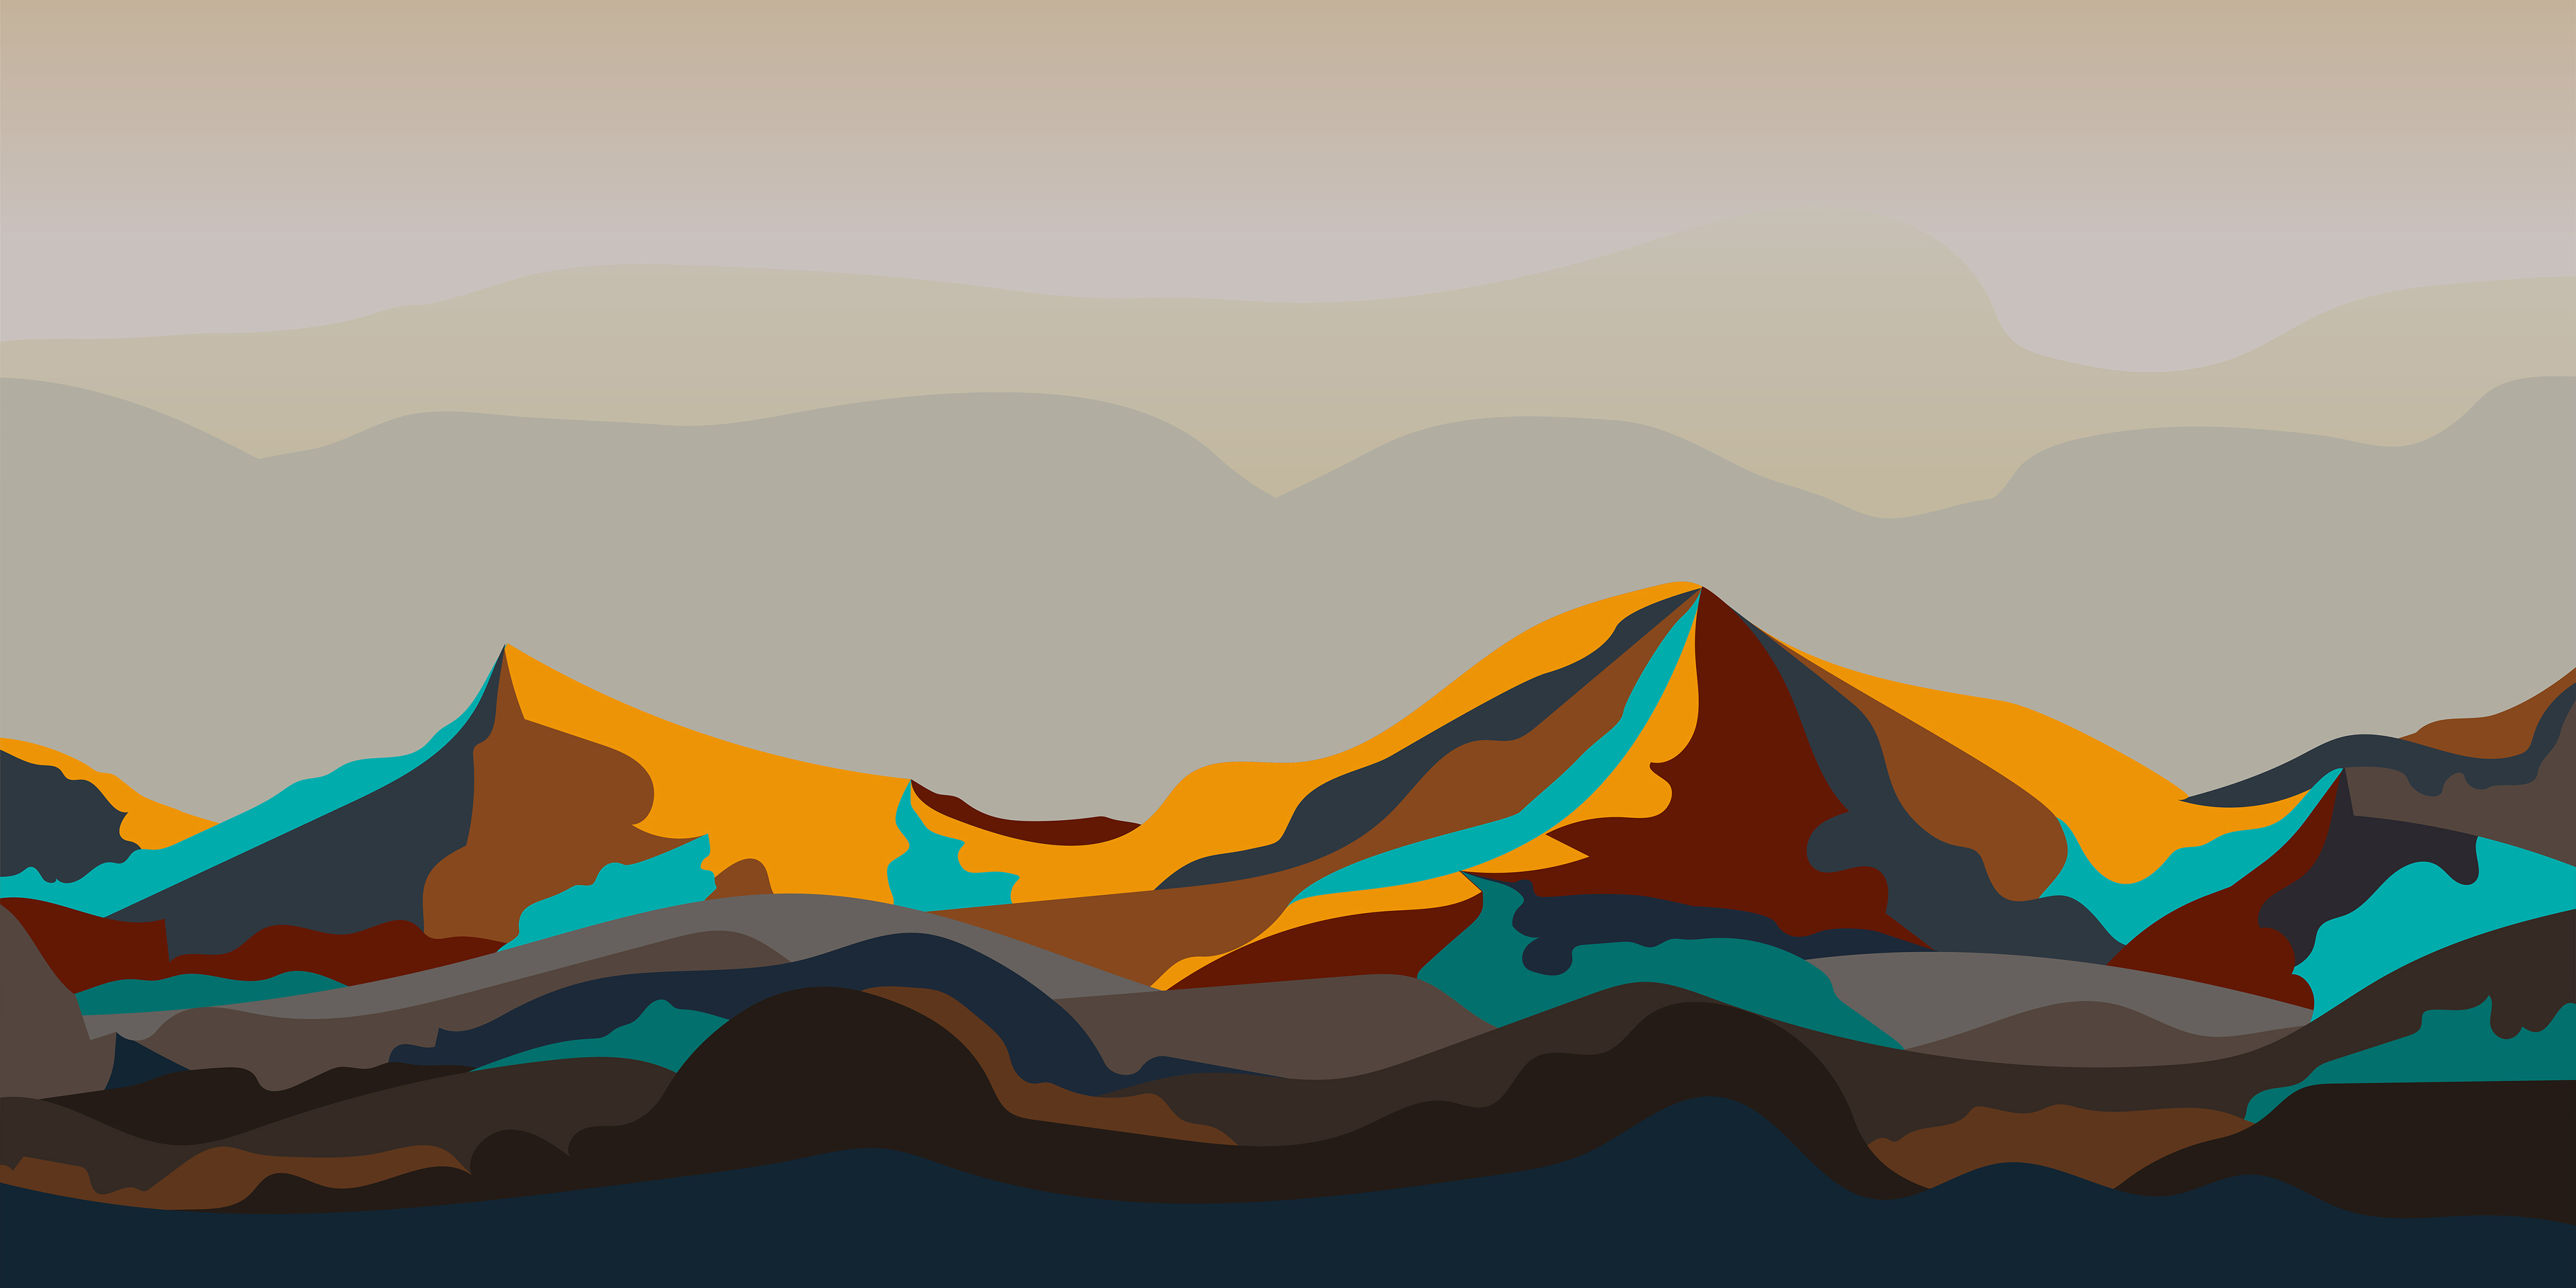 Painted mountain landscape graphic design Download Free 